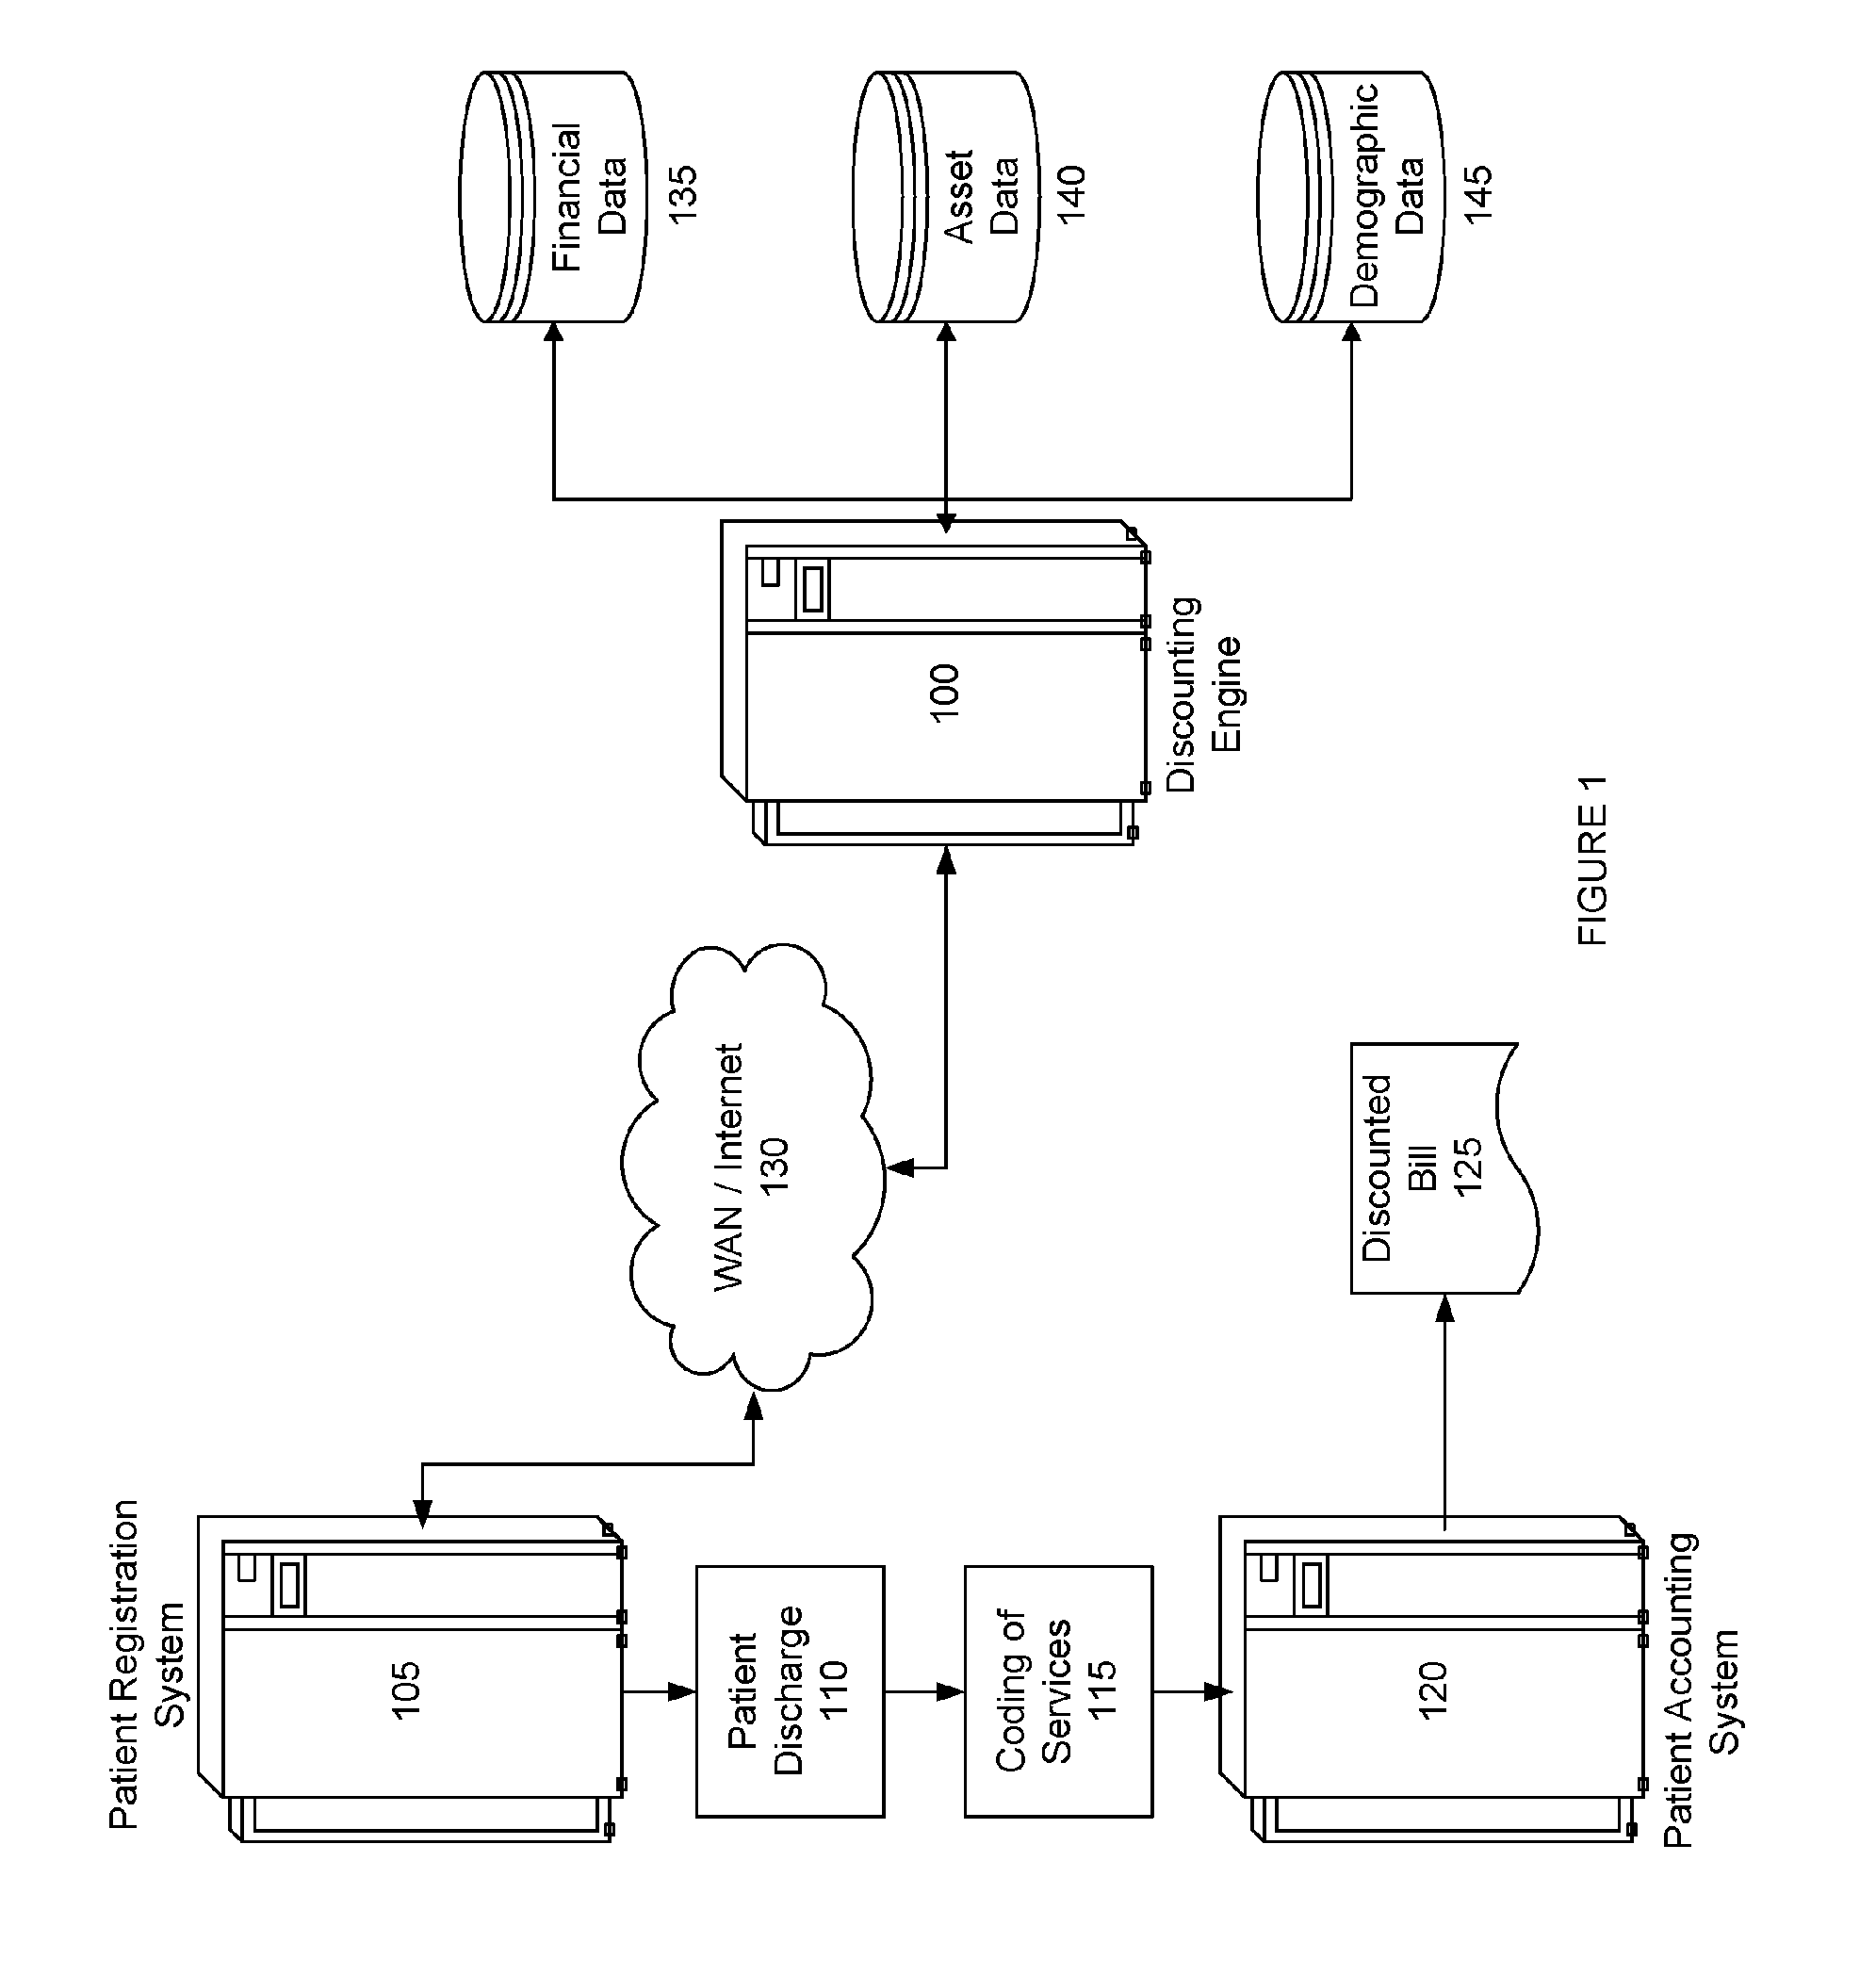 Automated system and method for discounting medical bills of self-pay patients